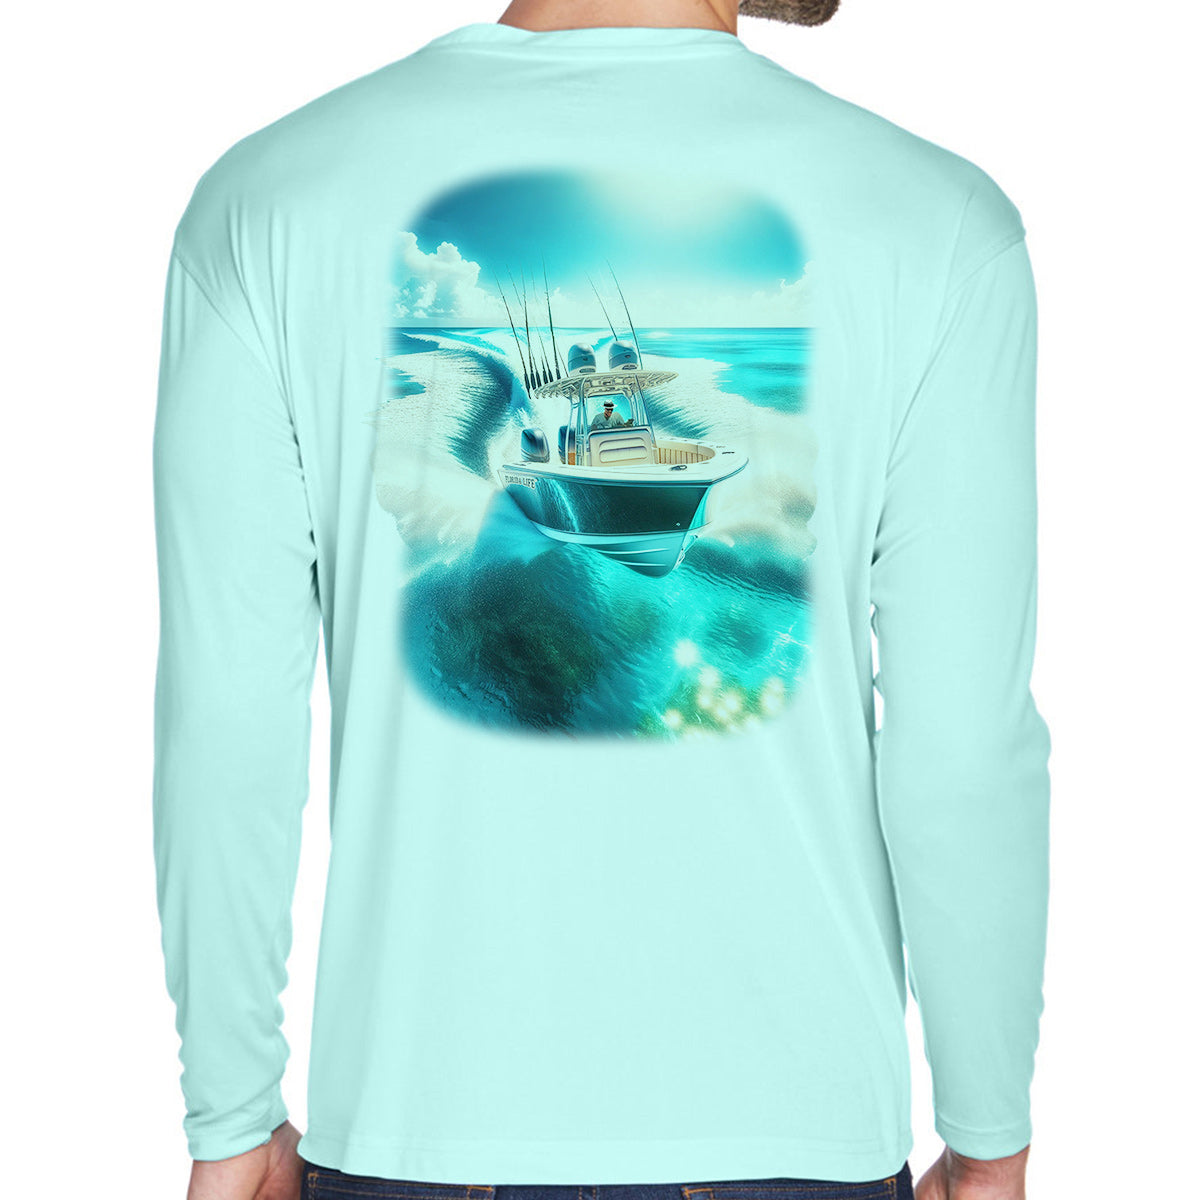 Searfrost Performance shirt. Full Throttle Boating Performance Shirt Closeup. SHowing a twin outboar dengine fishing boat going fast through the waters of Florida.